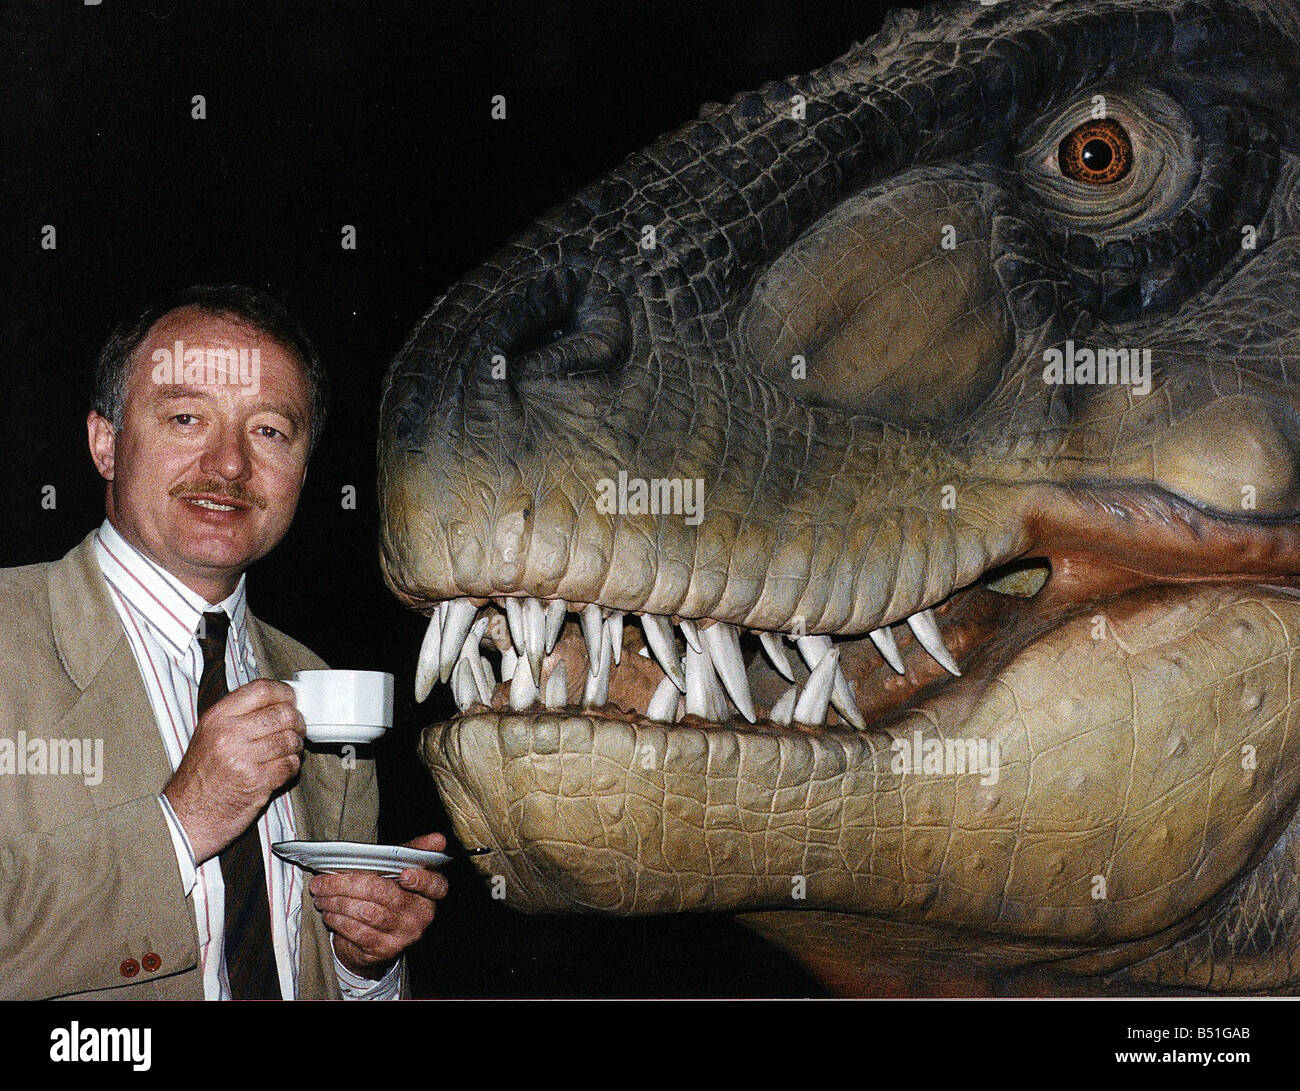 Ken LIvingstone Labour MP At London s Alexandra Palace exhibition of moving dinosaurs Stock Photo